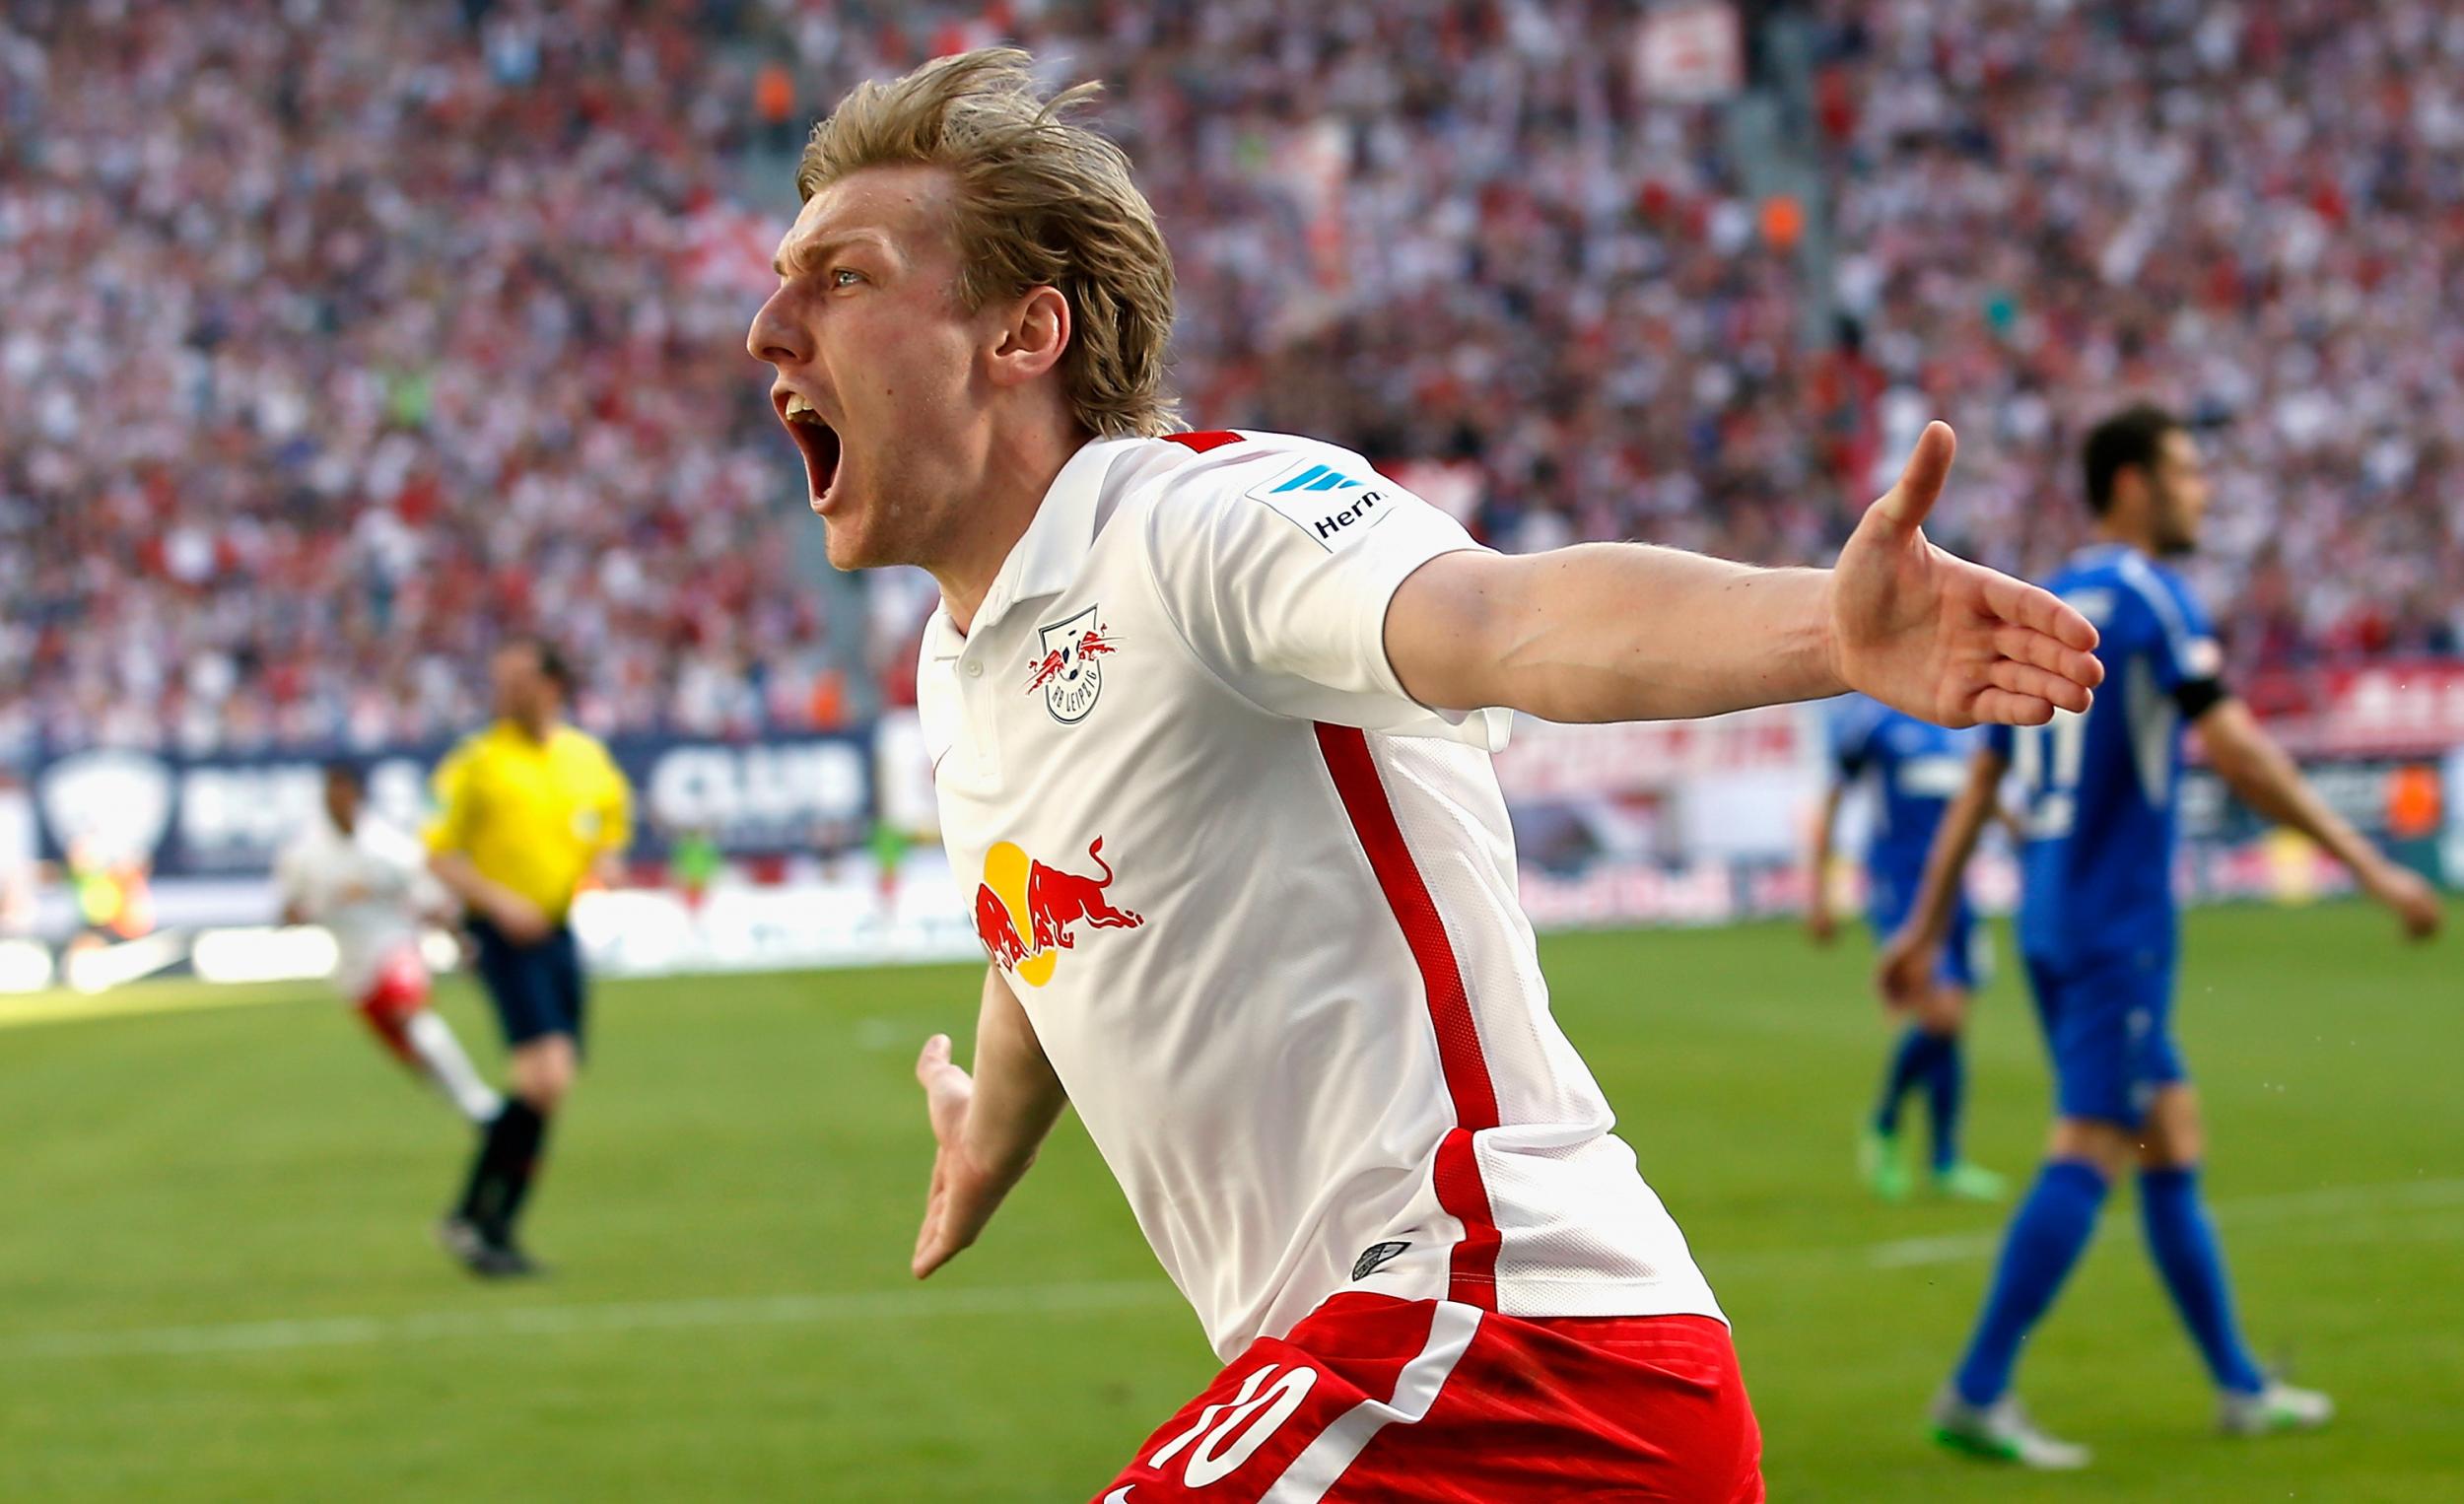 Forsberg has been involved in 13 goals for RB Leipzig this season